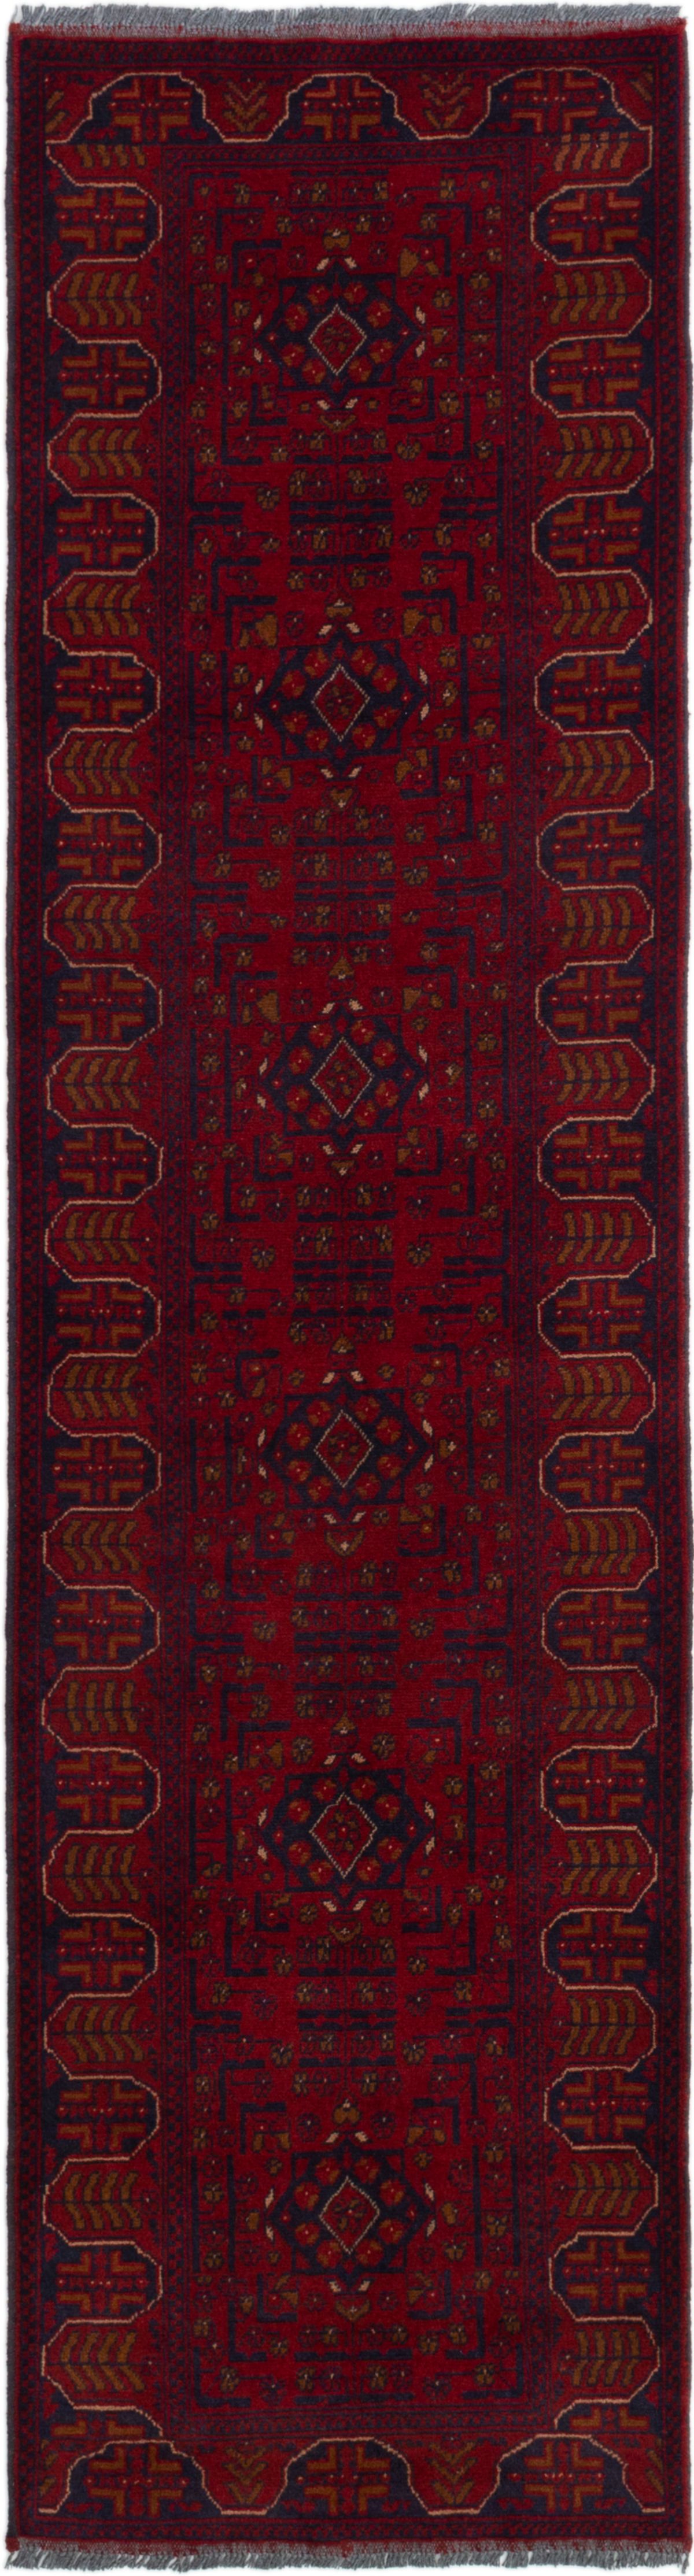 Hand-knotted Finest Khal Mohammadi Dark Red Wool Rug 2'7" x 9'7"  Size: 2'7" x 9'7"  